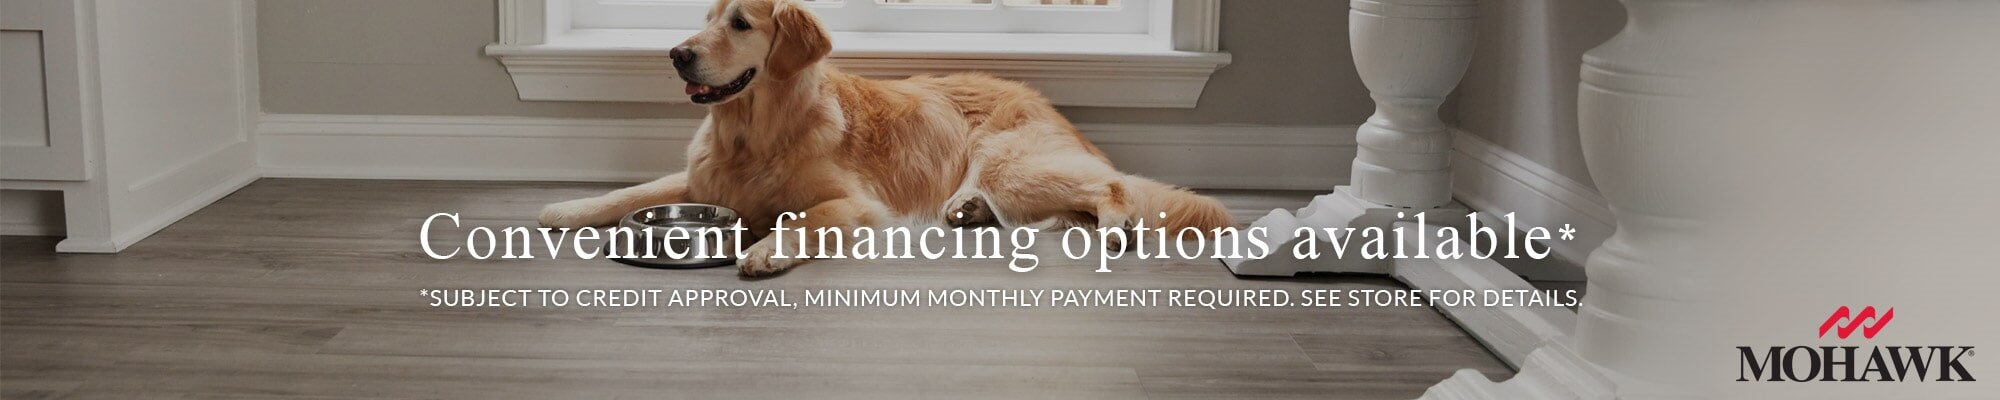 Financing options from Allman's Carpet, serving the Bountiful, UT area